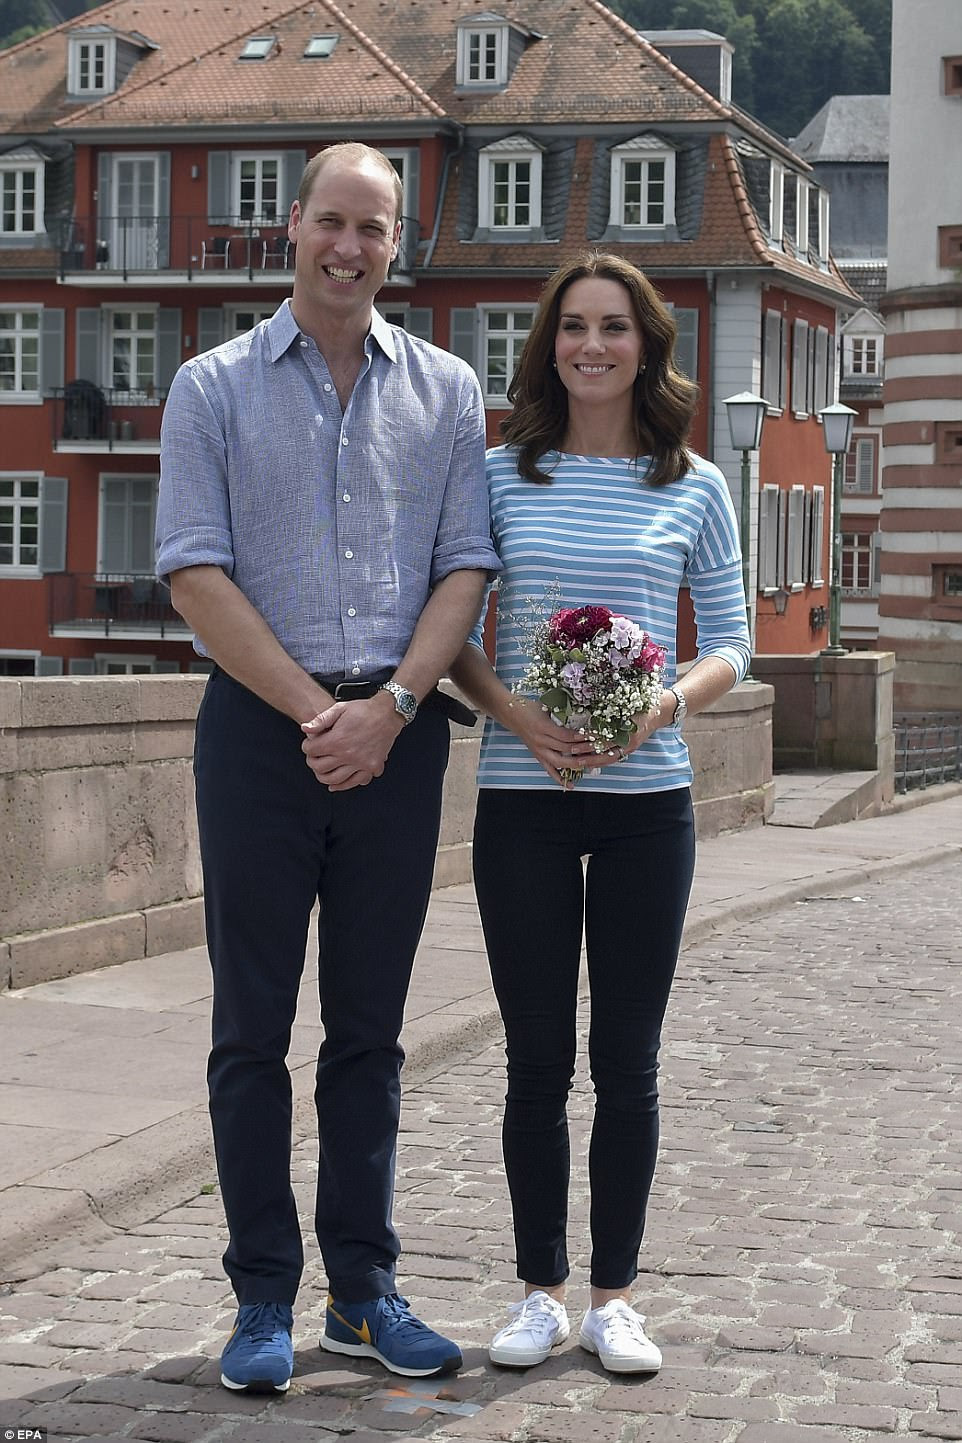 No hard feelings! Kate and William pose for a photo after the Duchess' team was beaten by her husband's, despite having an Olympic rower on her side. The Duchess turned once again to her trusty £55 Superga trainers